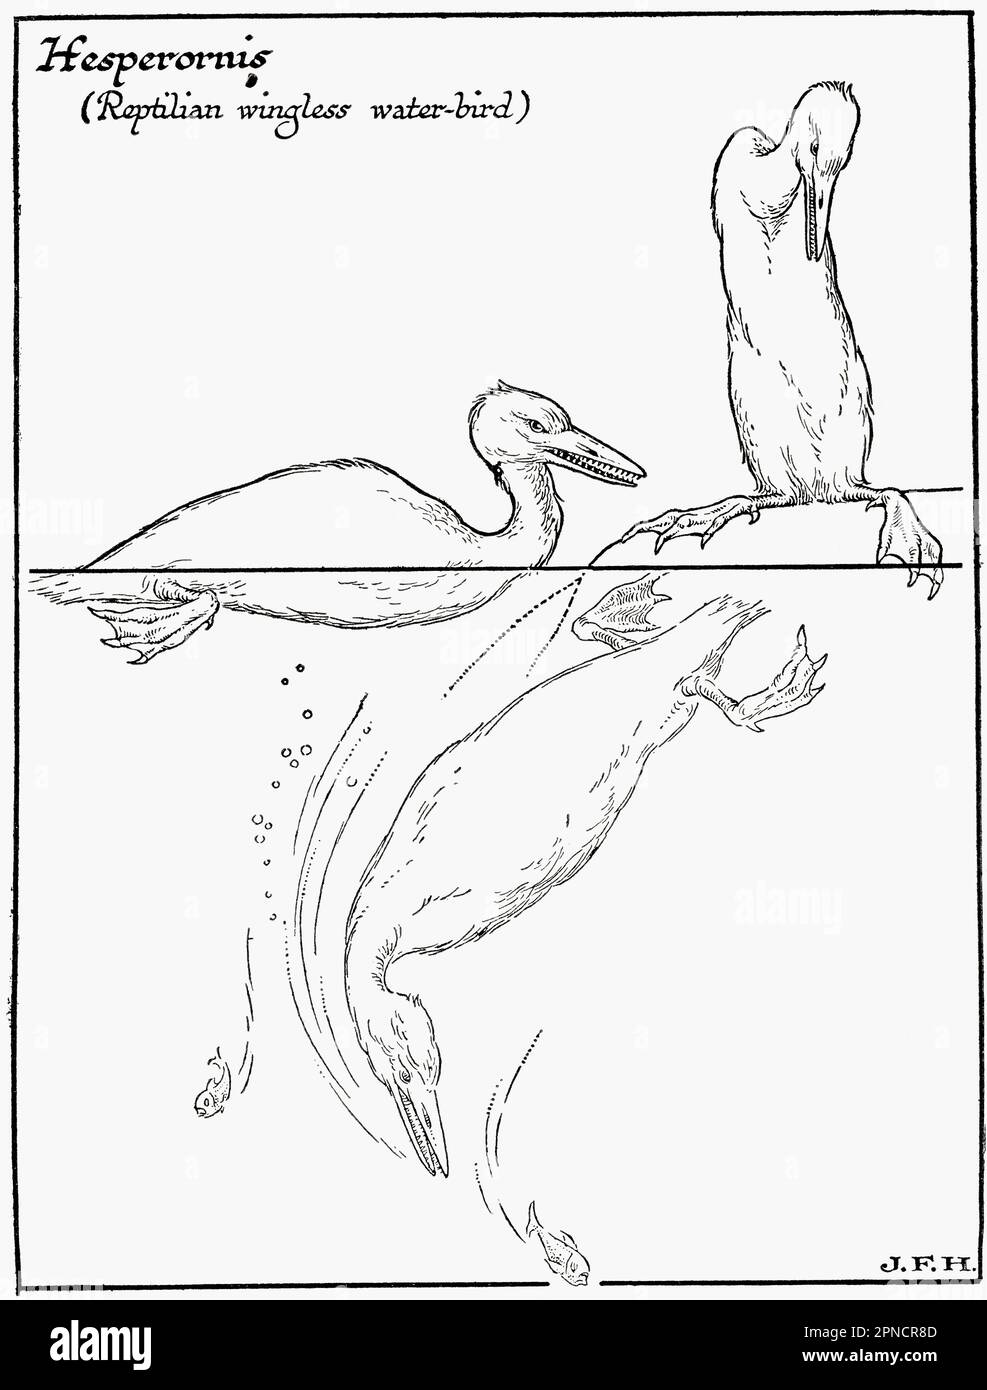 Diagram of a Hesperornis, a reptilian wingless water-bird.  From the book Outline of History by H.G. Wells, published 1920. Stock Photo